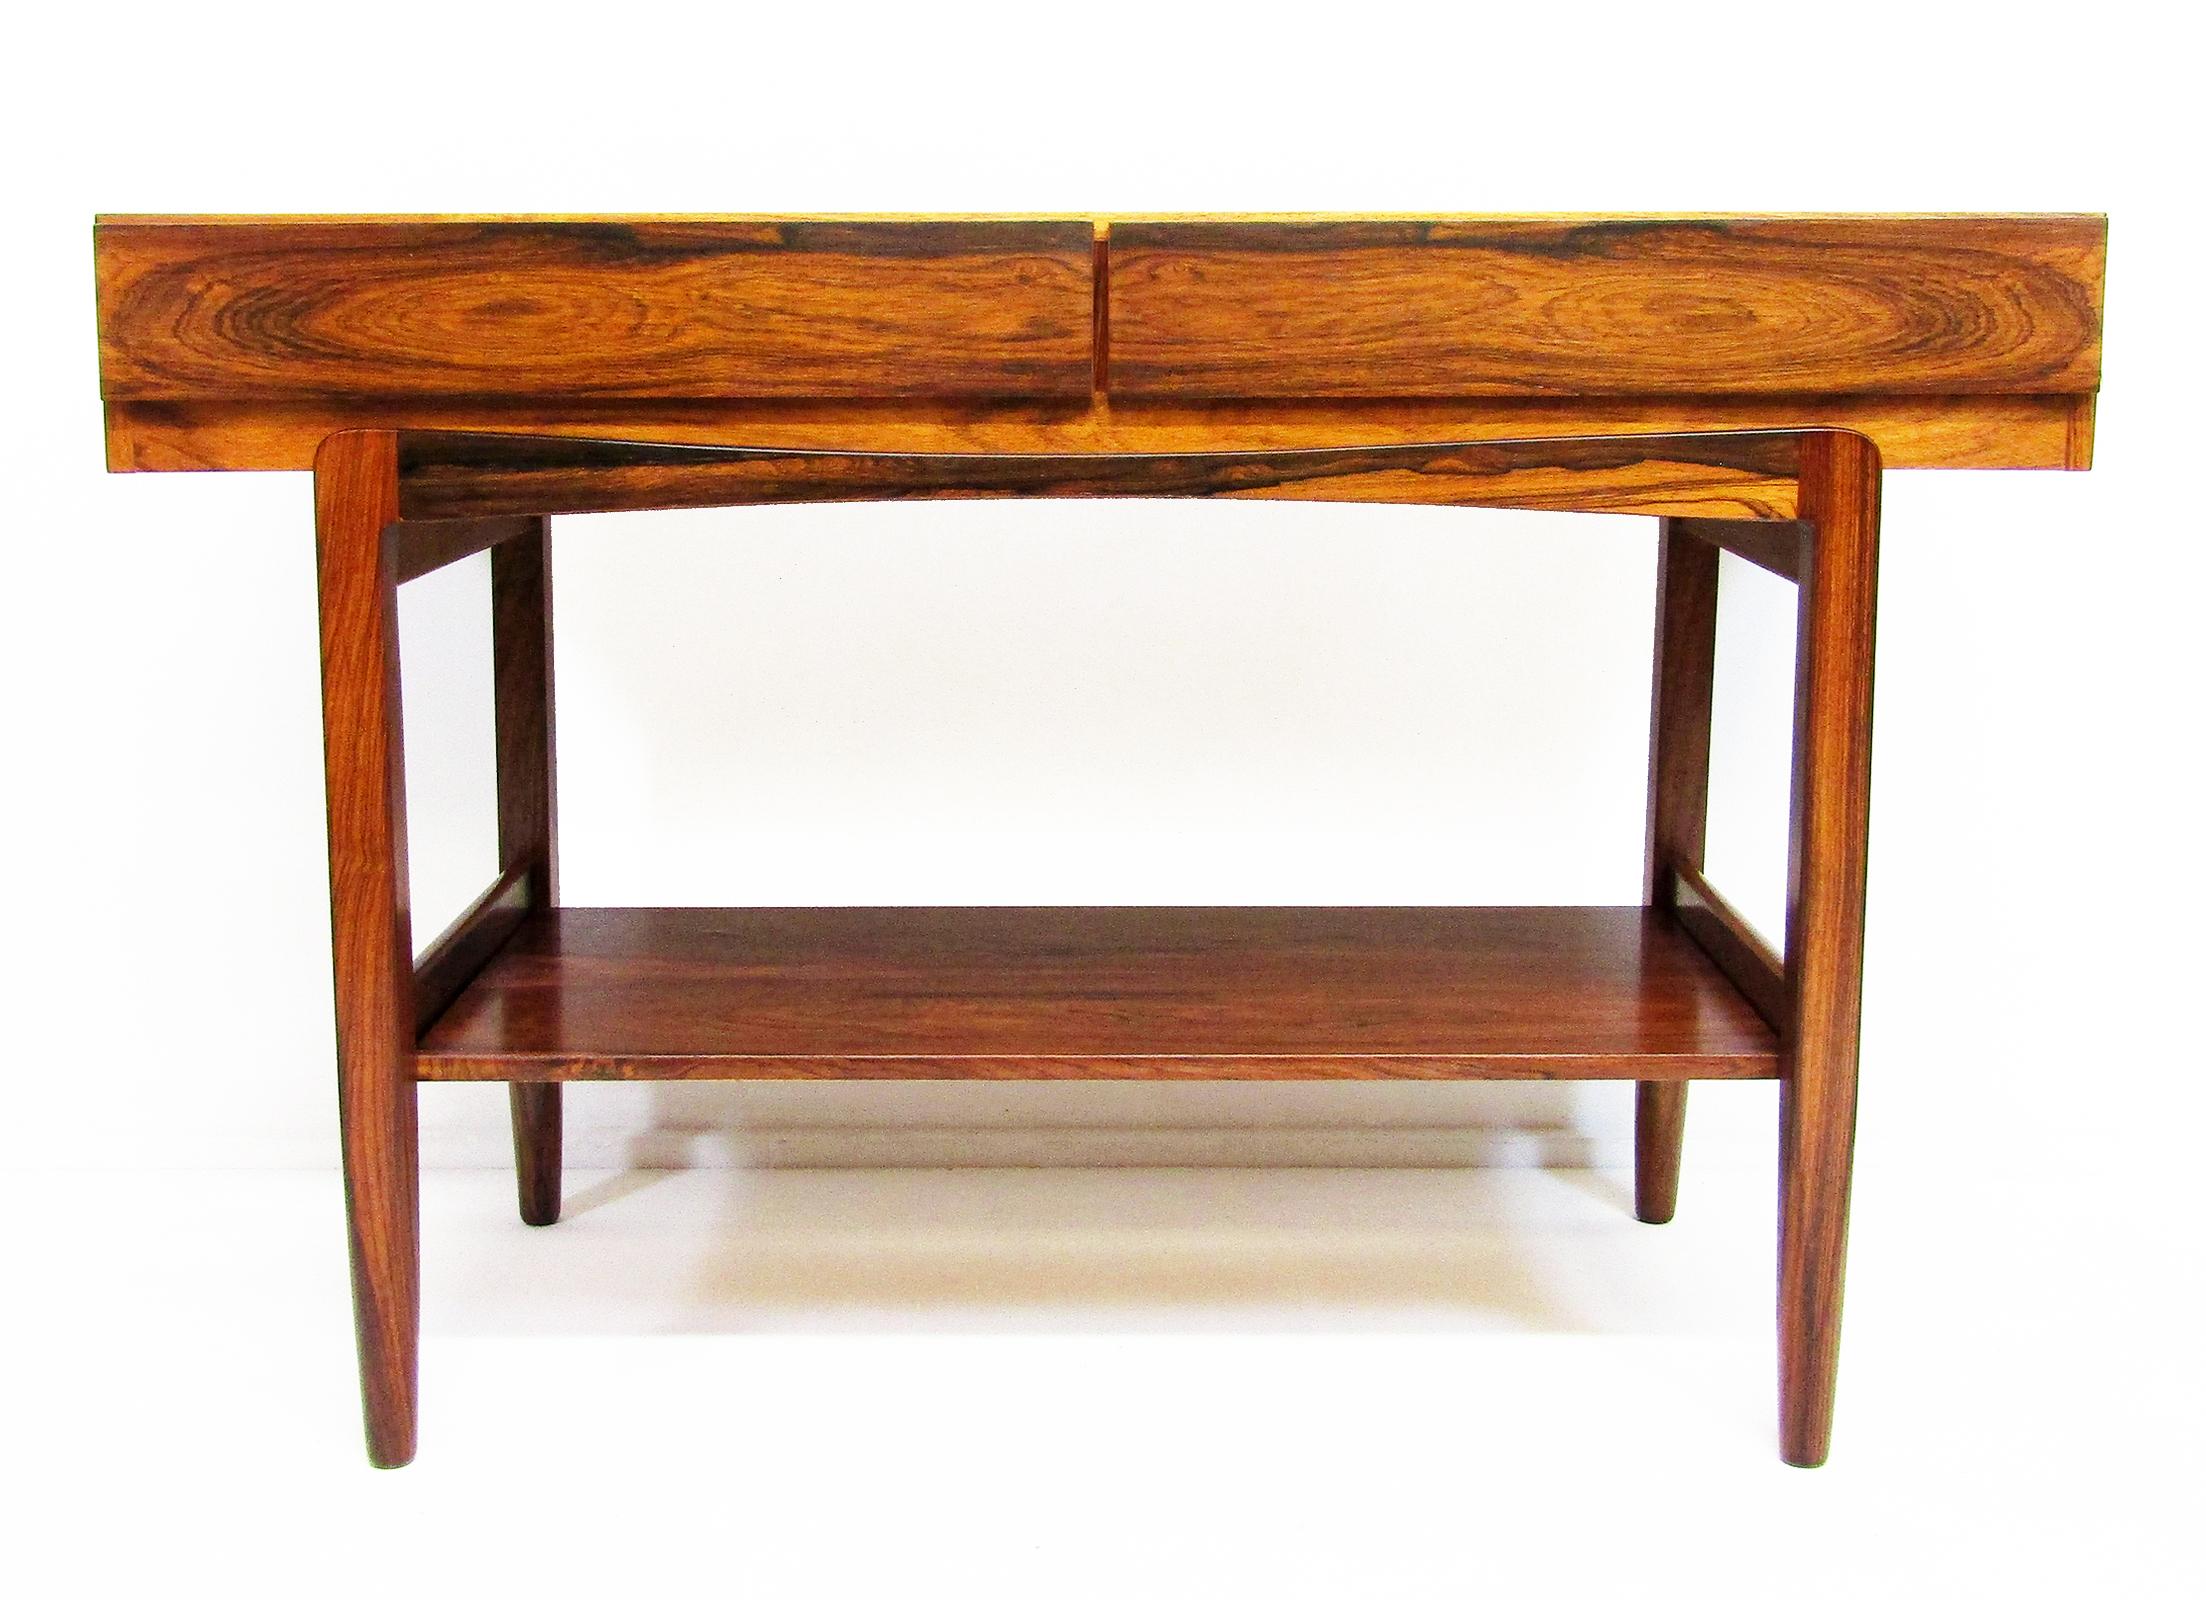 A Danish rosewood console table with two drawers, undertier and distinctive curved leg supports by Ib Kofod Larsen for Faarup Mobelfabrik. The Faarup sticker is affixed to the rear.

This rare adapted version has a removeable undertier,  allowing it